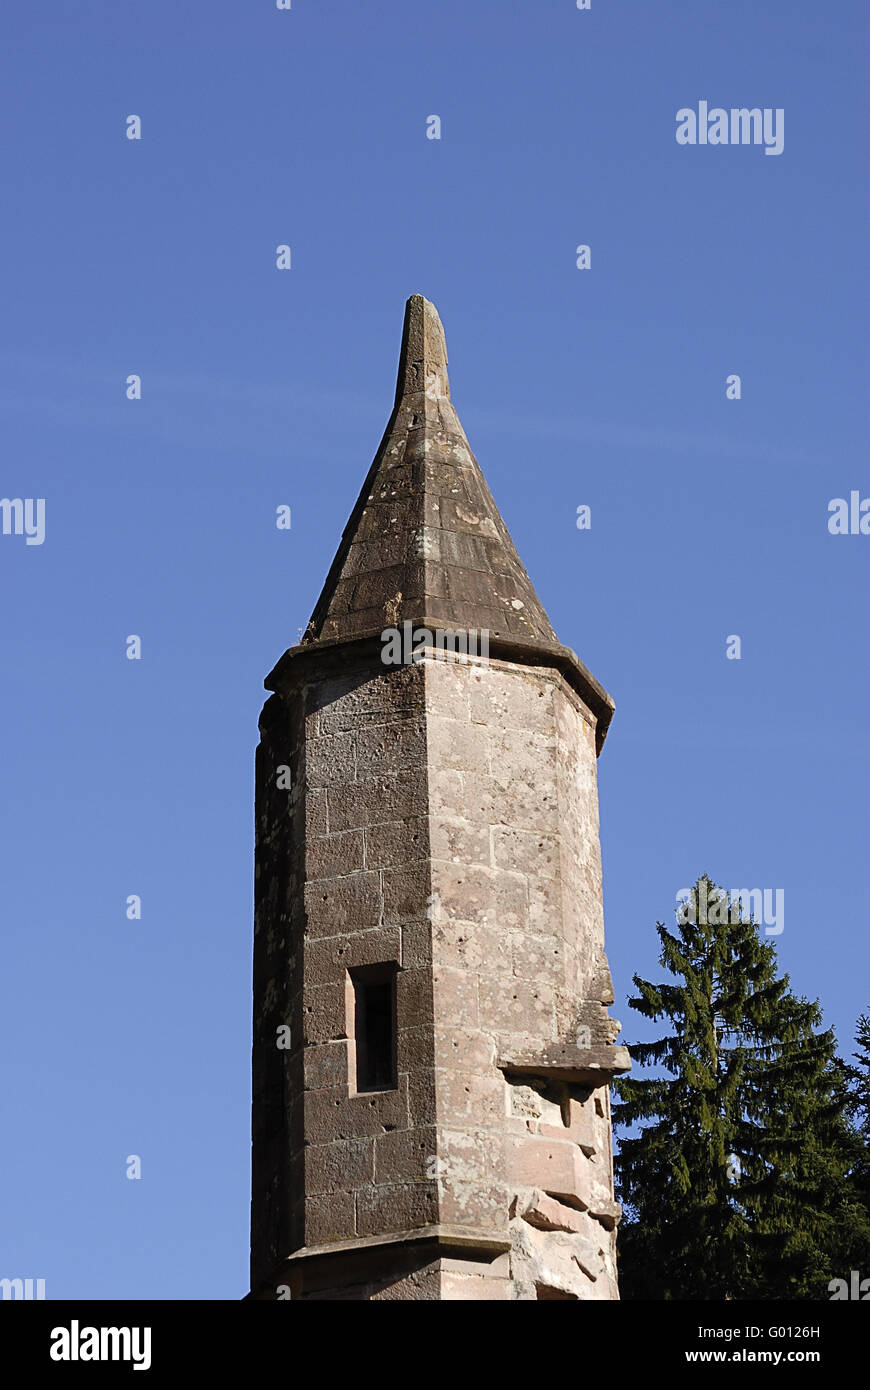 spitzturm-pointed tower Stock Photo